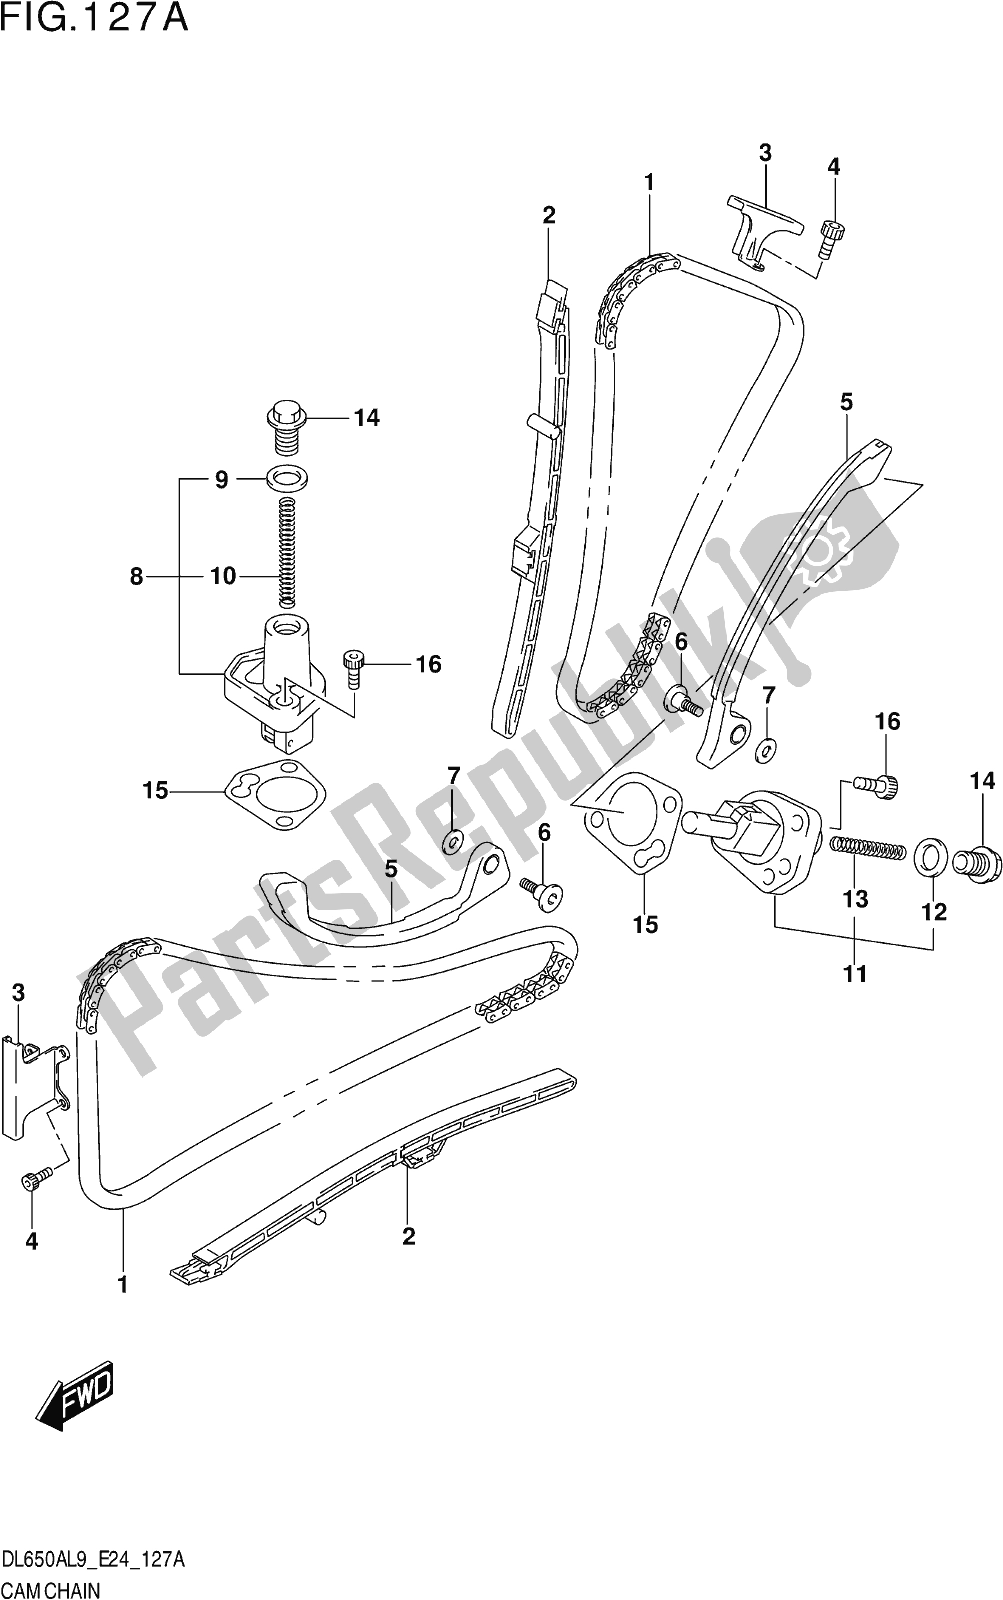 All parts for the Fig. 127a Cam Chain of the Suzuki DL 650A V Strom 2019